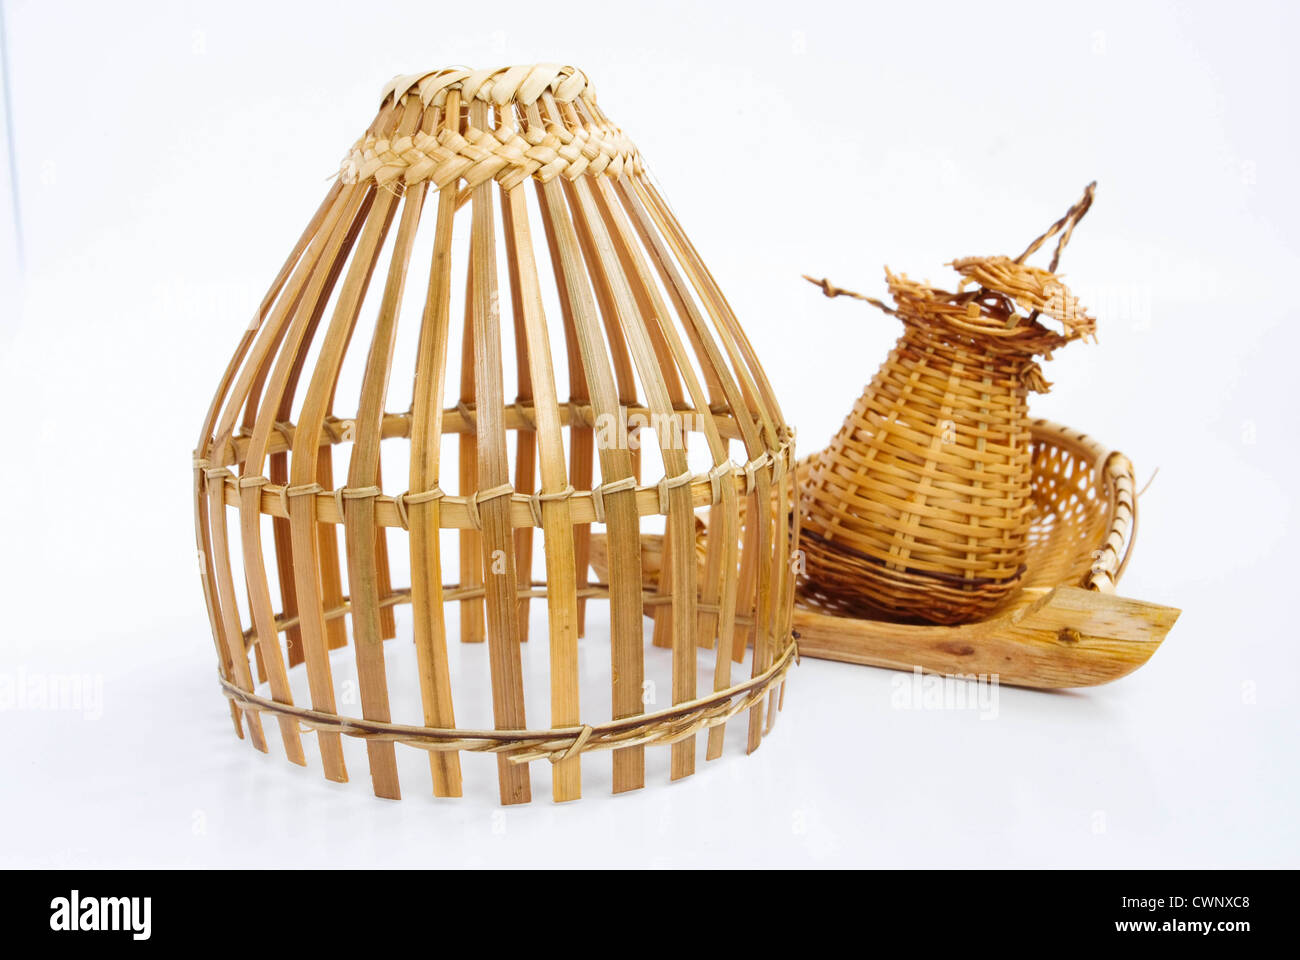 Thailand bamboo fishing trap made from bamboo wood Stock Photo - Alamy